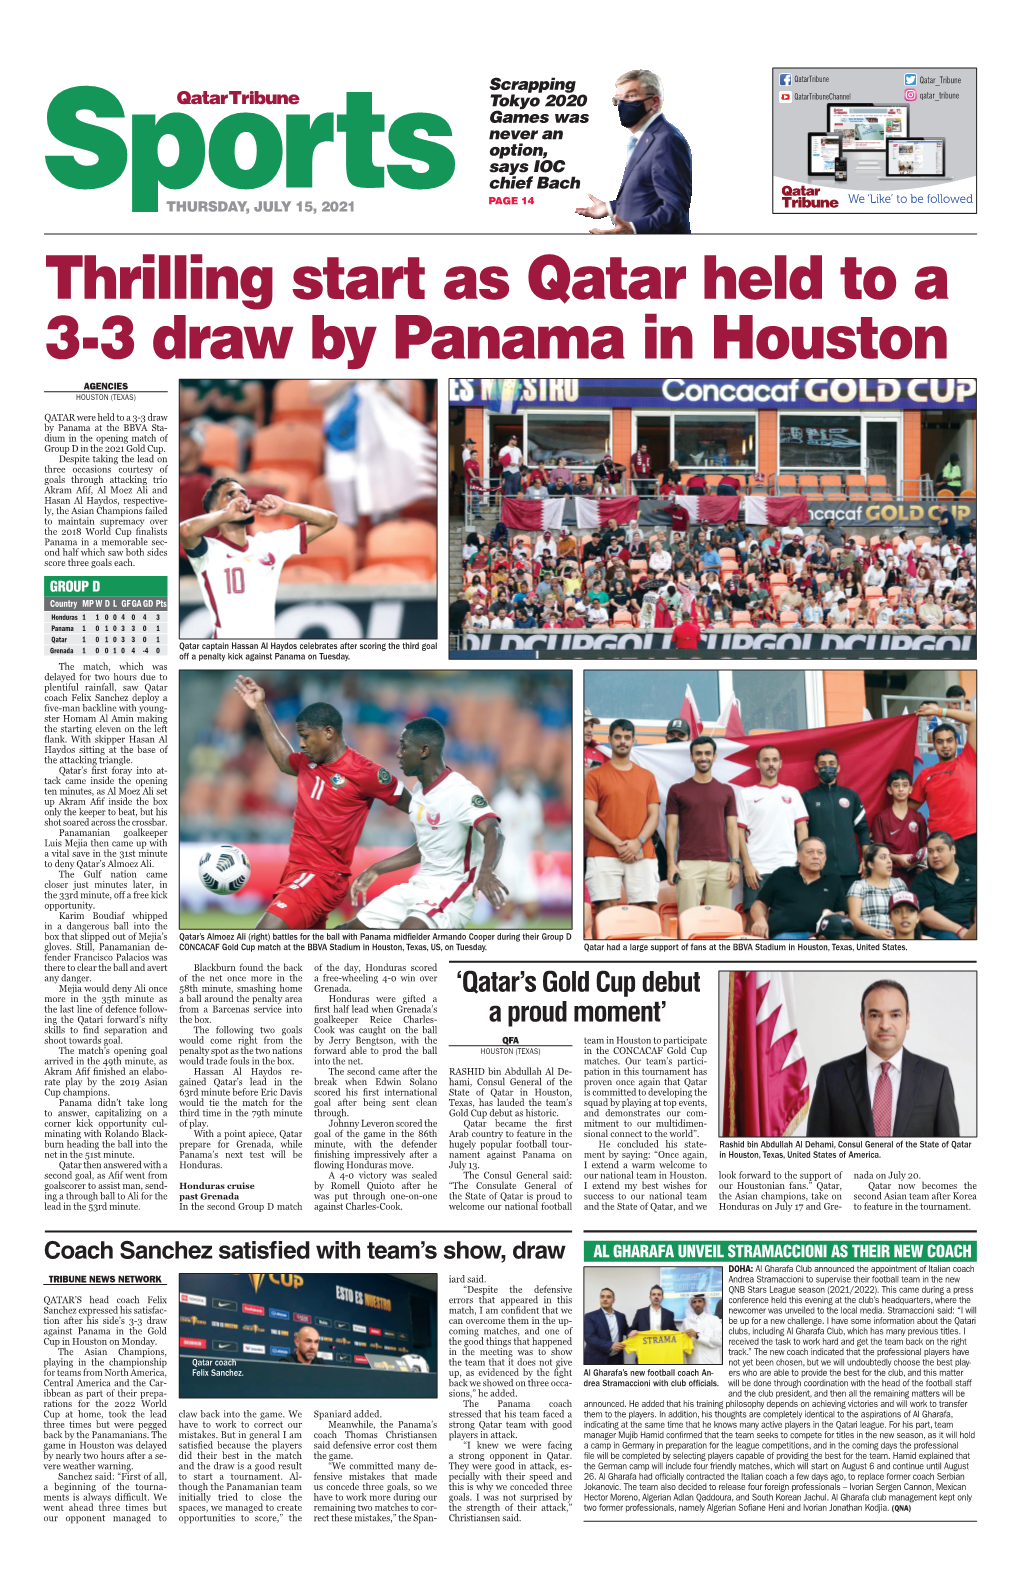 Thrilling Start As Qatar Held to a 3-3 Draw by Panama in Houston Agencies Houston (Texas)